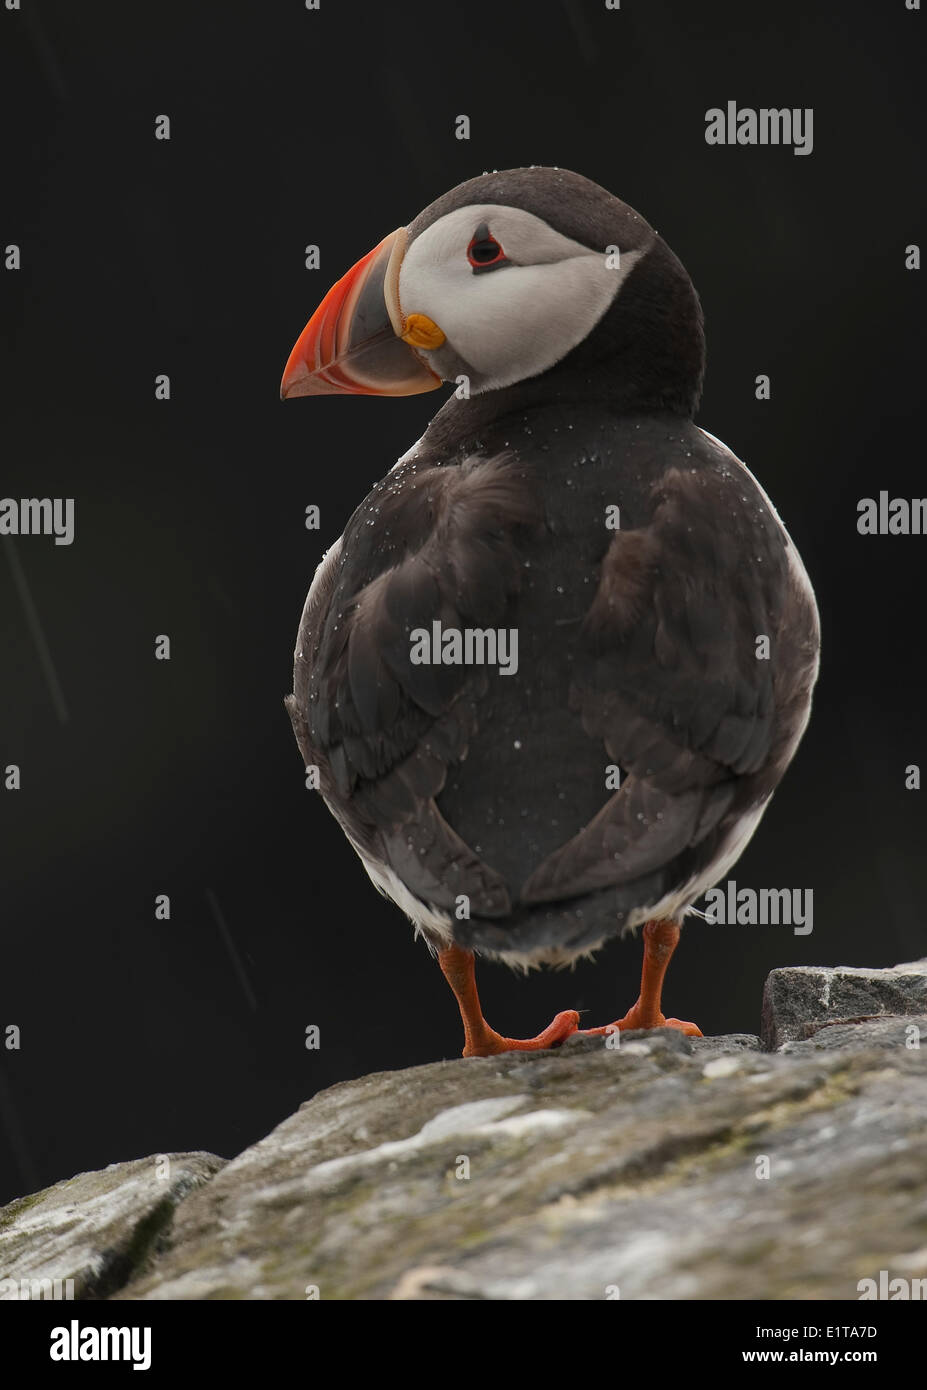 Puffin on a rock with a dark background Stock Photo